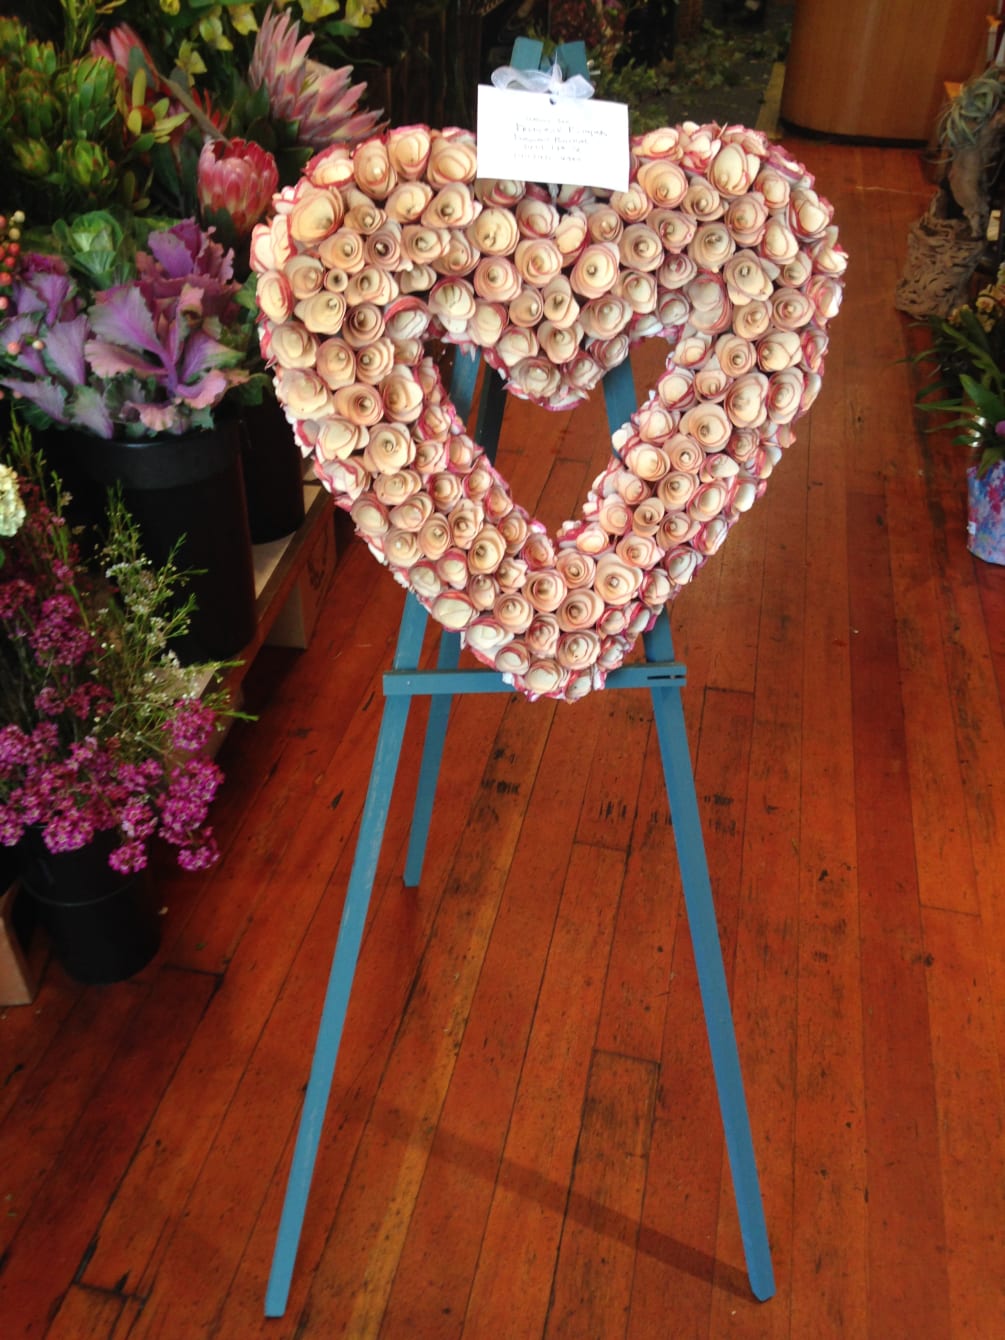 This beautiful heart is made from wood-shavings and will last for years!